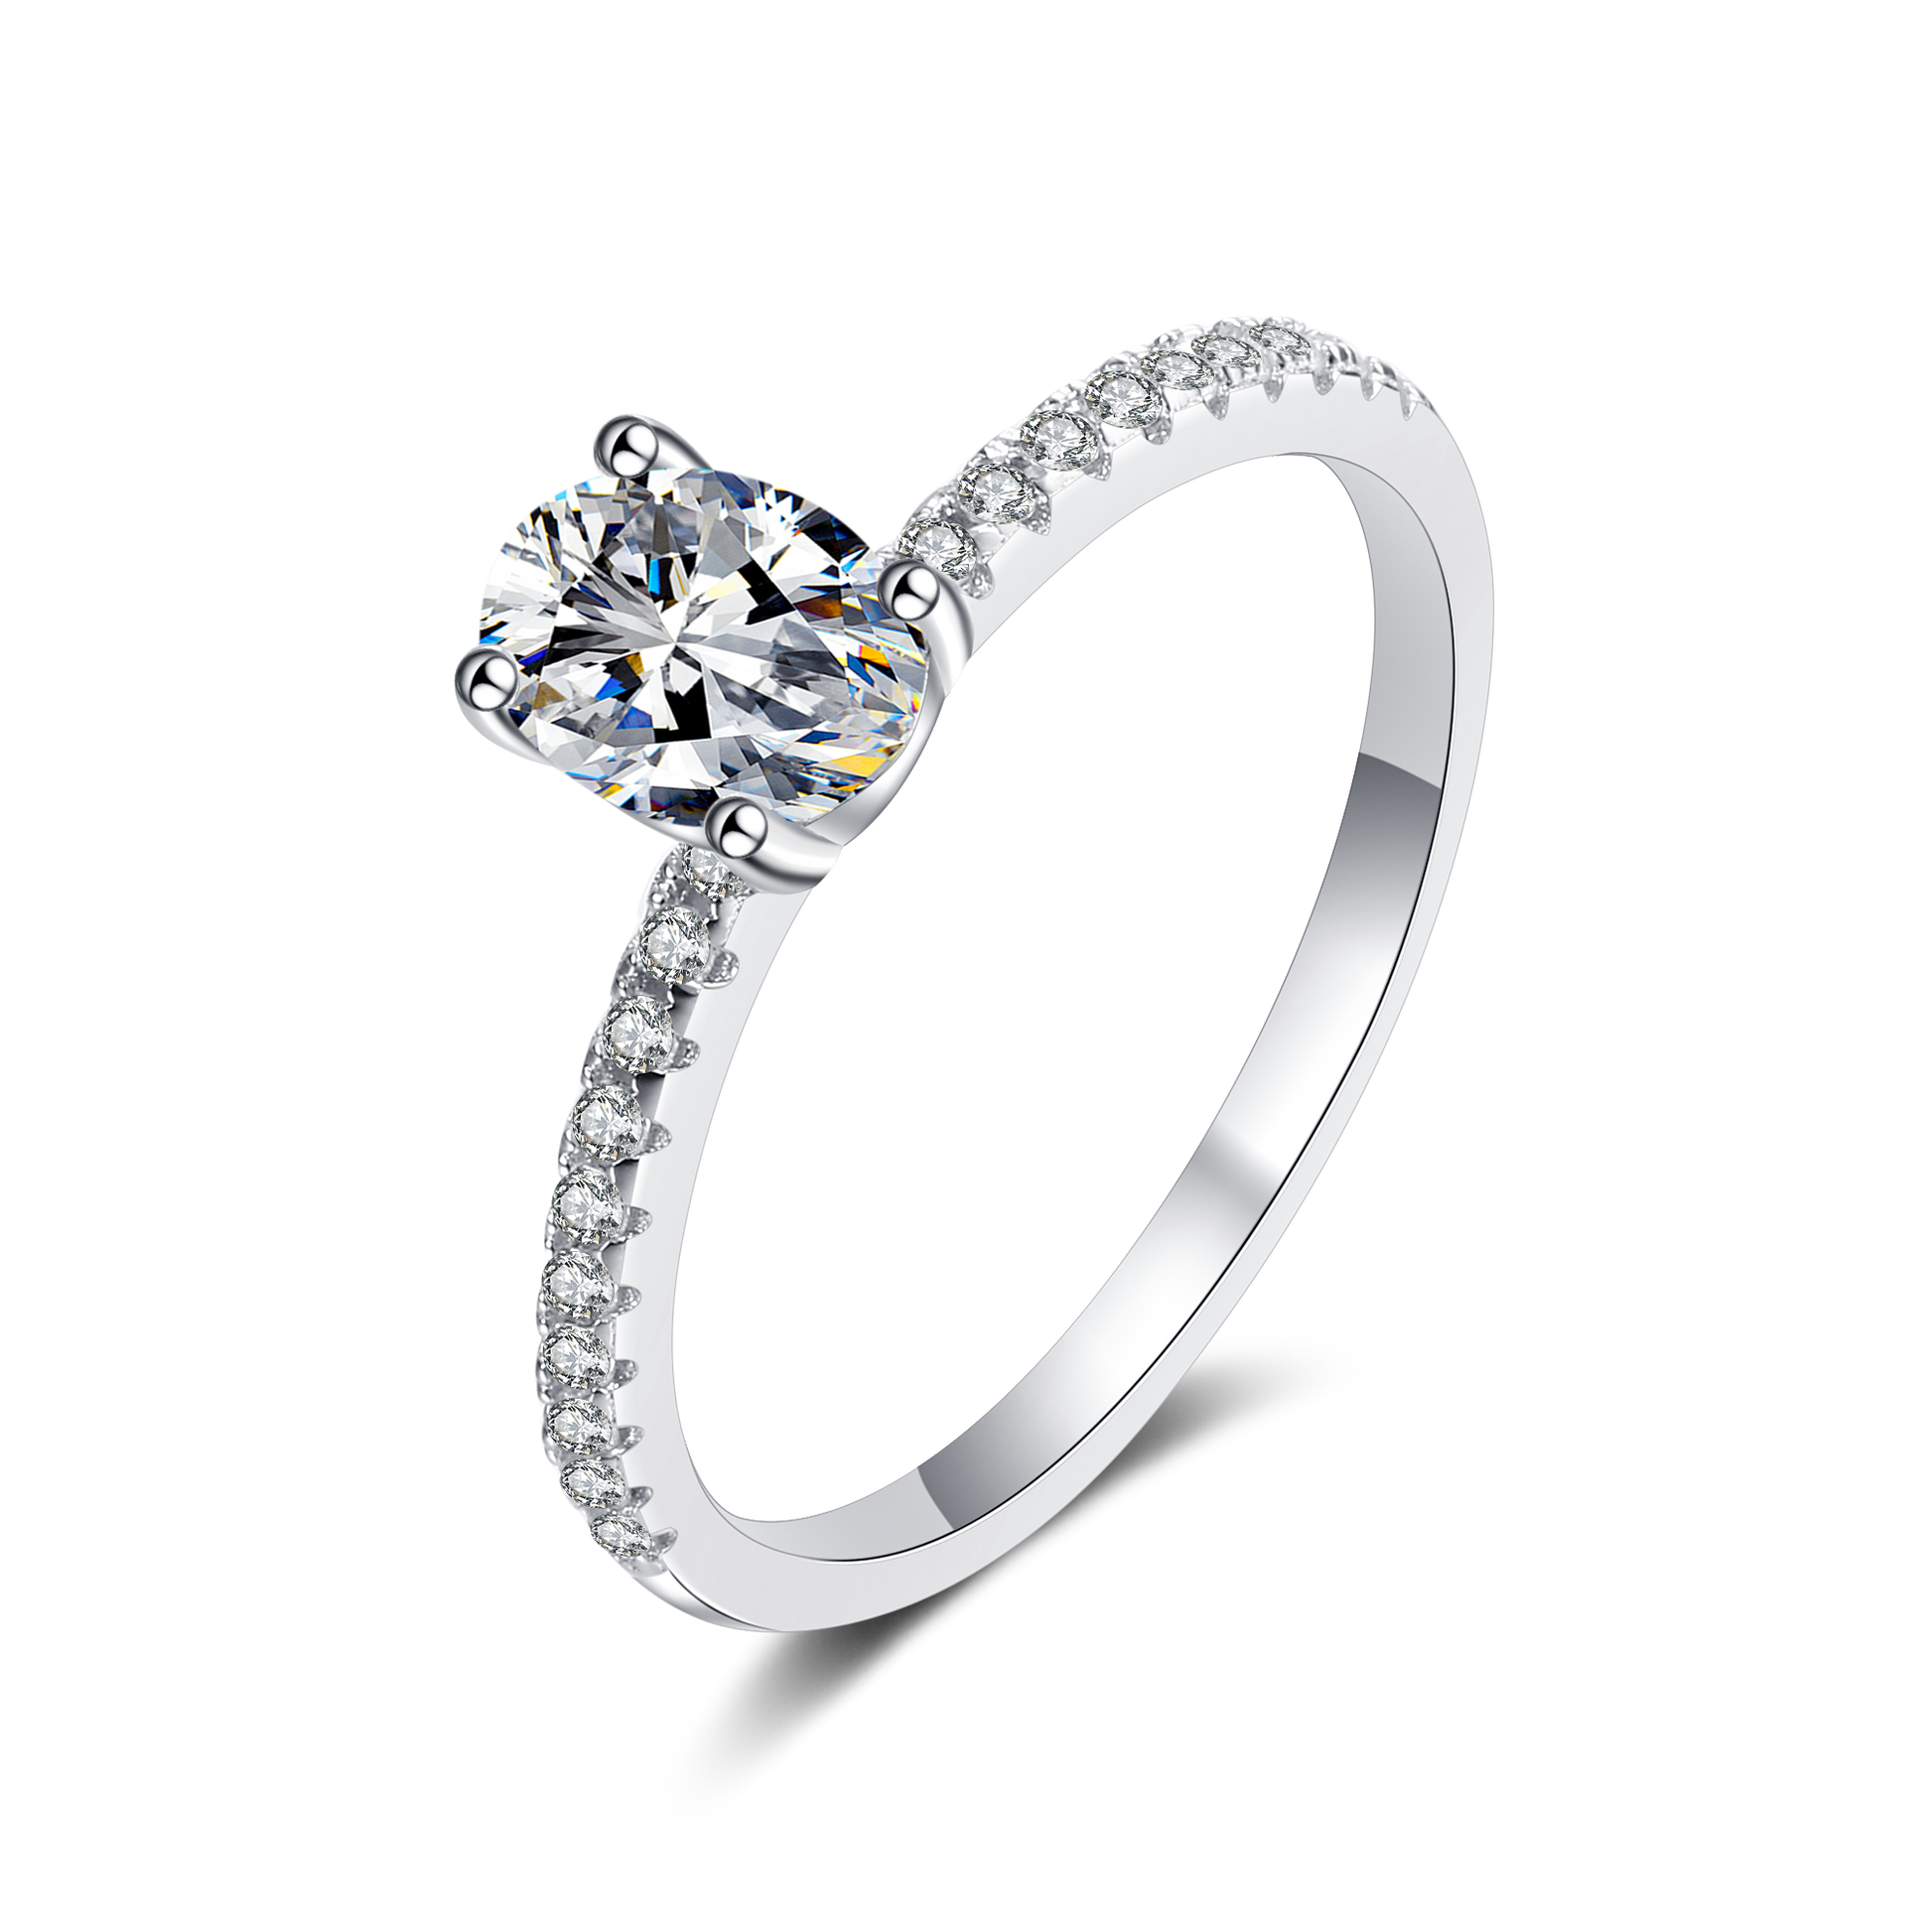 Oval Cut solitaire 1ct, 2ct engagement ring, promise ring, wedding, gift for her, girl, girlfriend, lover, for women, mother, mom, mum, for wife, S925 Moissanite Diamond ring, Valentine’s Day, Mother’s Day, Birthday, anniversary